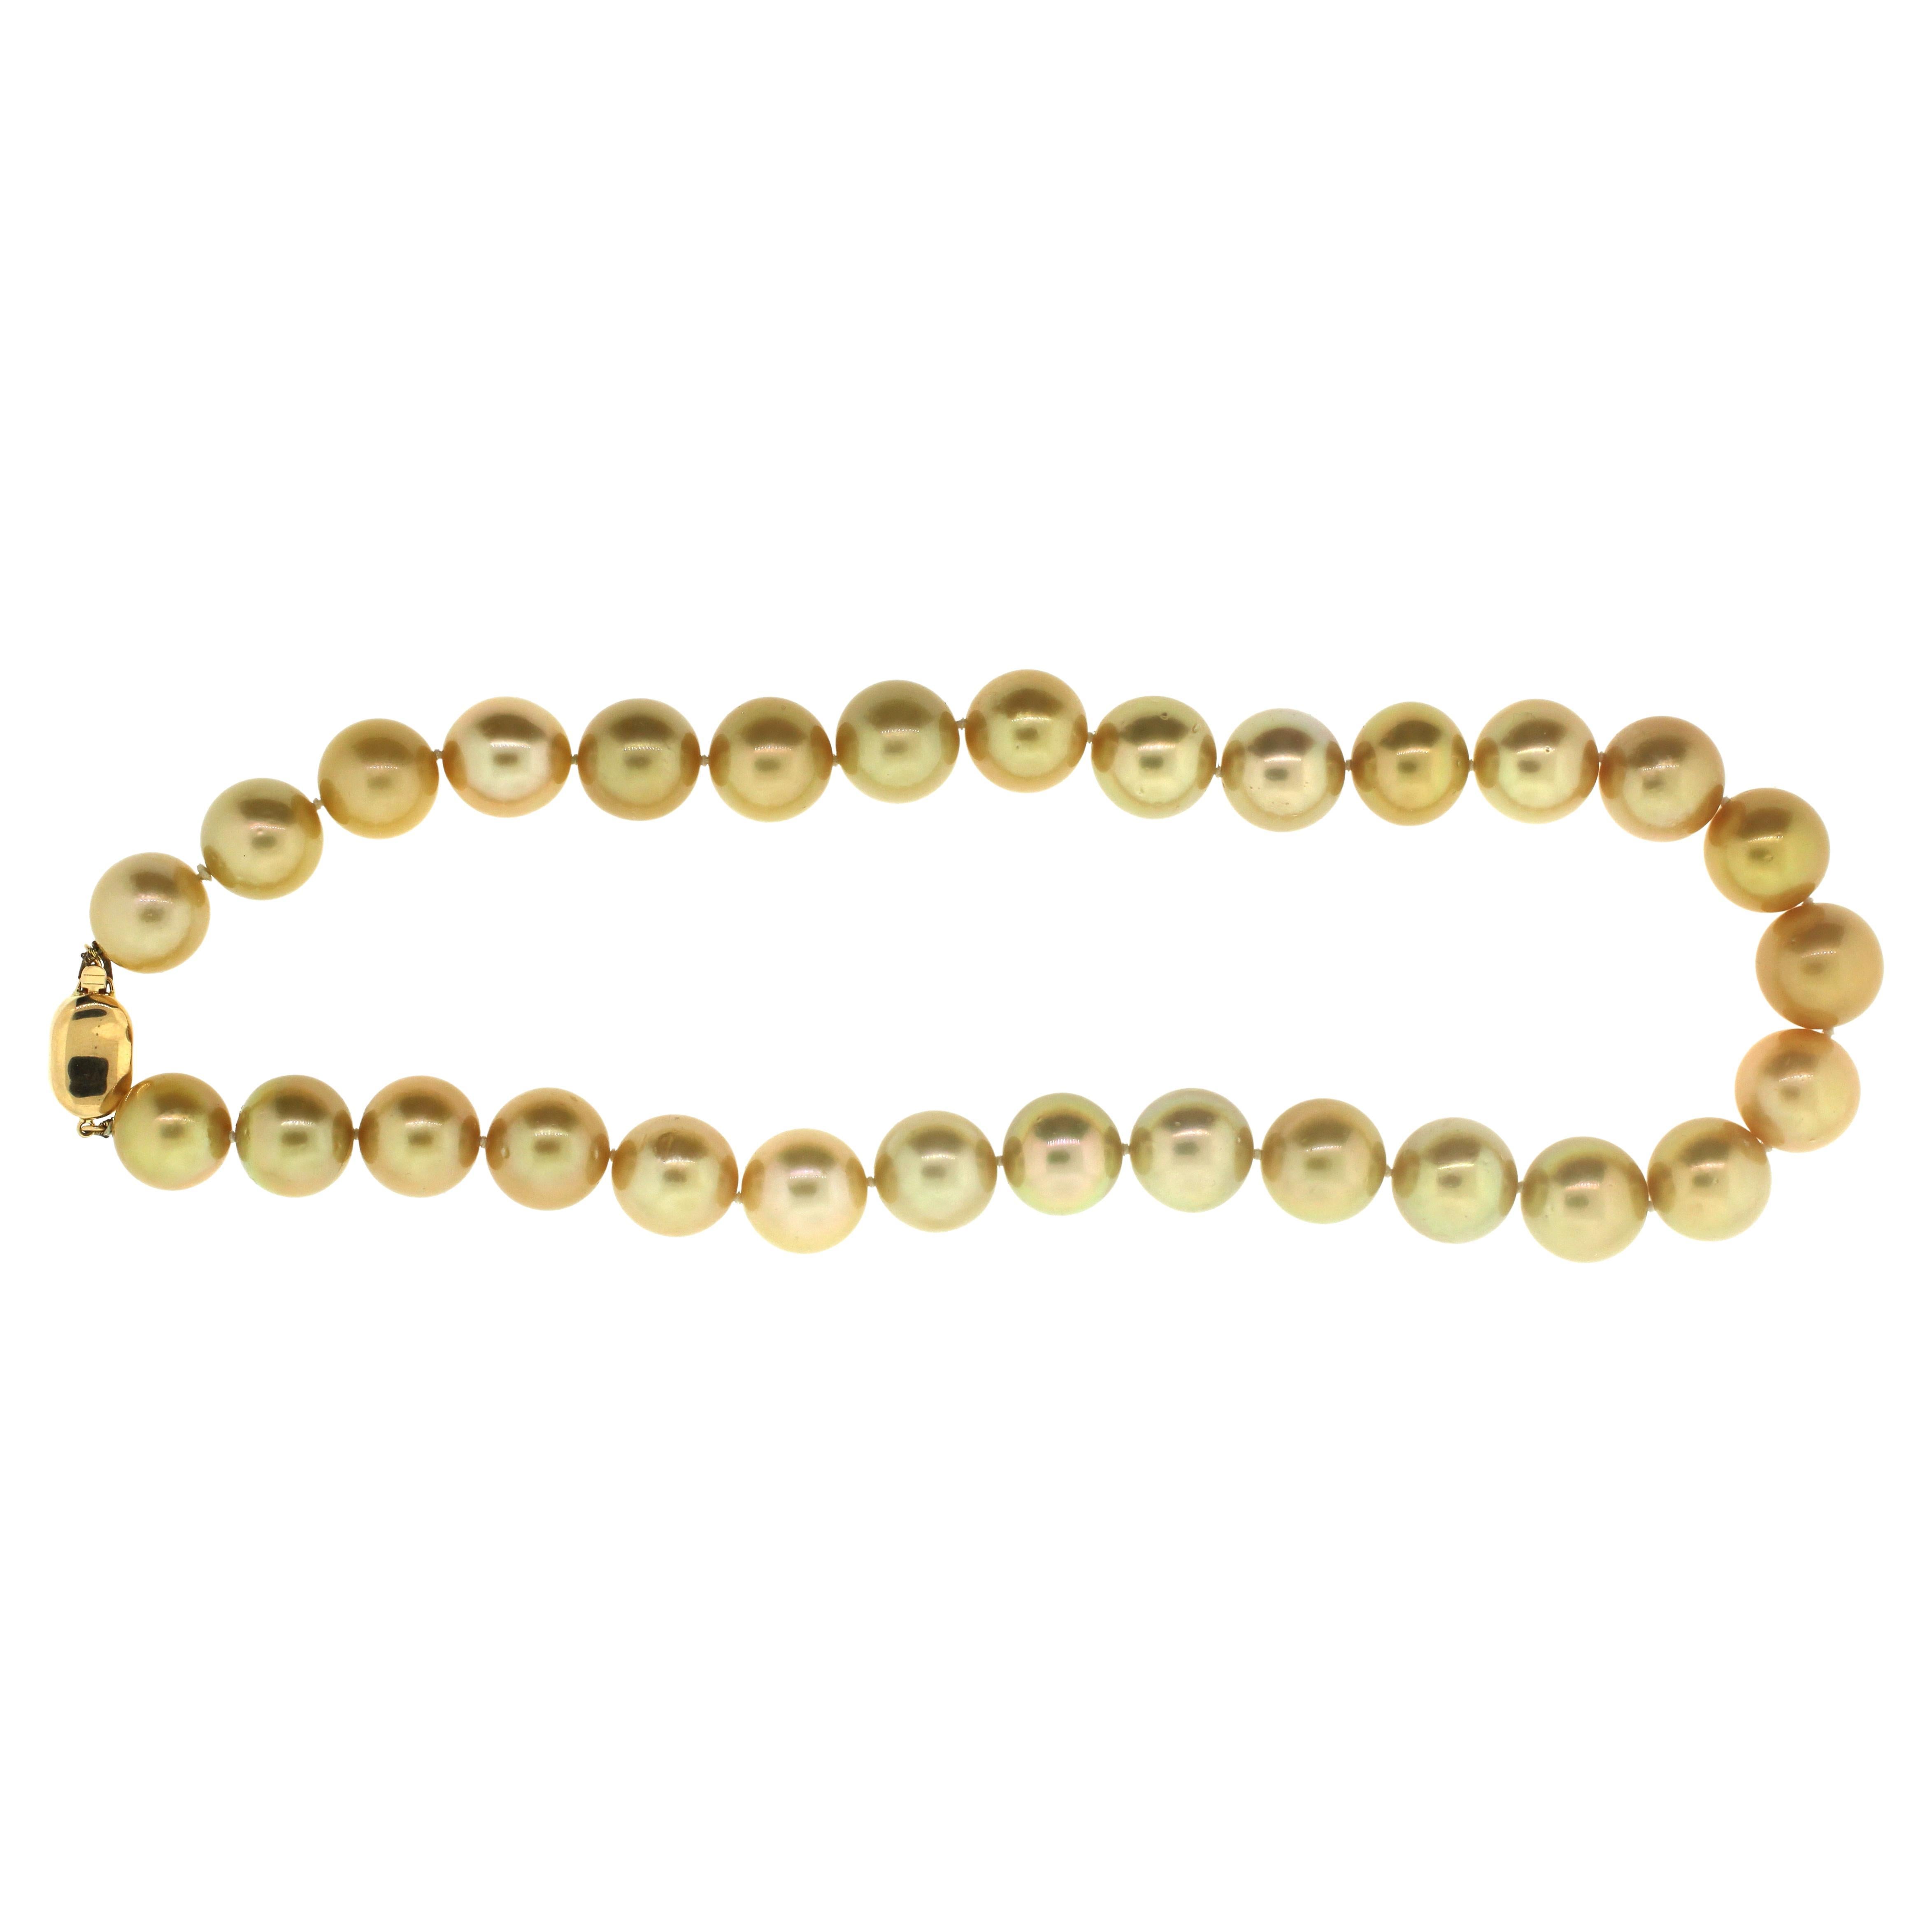 Hakimoto By Jewel Of Ocean 18K South Sea Strand Necklace
18K Yellow Gold  
Weight (g): 104
Cultured Natural Golden South Sea Pearl 
Pearl Size: 13X14mm 
Pearl Shape: Round 
Body color: Deep Golden
Orient: Very Good
Luster: Very Good 
Surface:  Clean